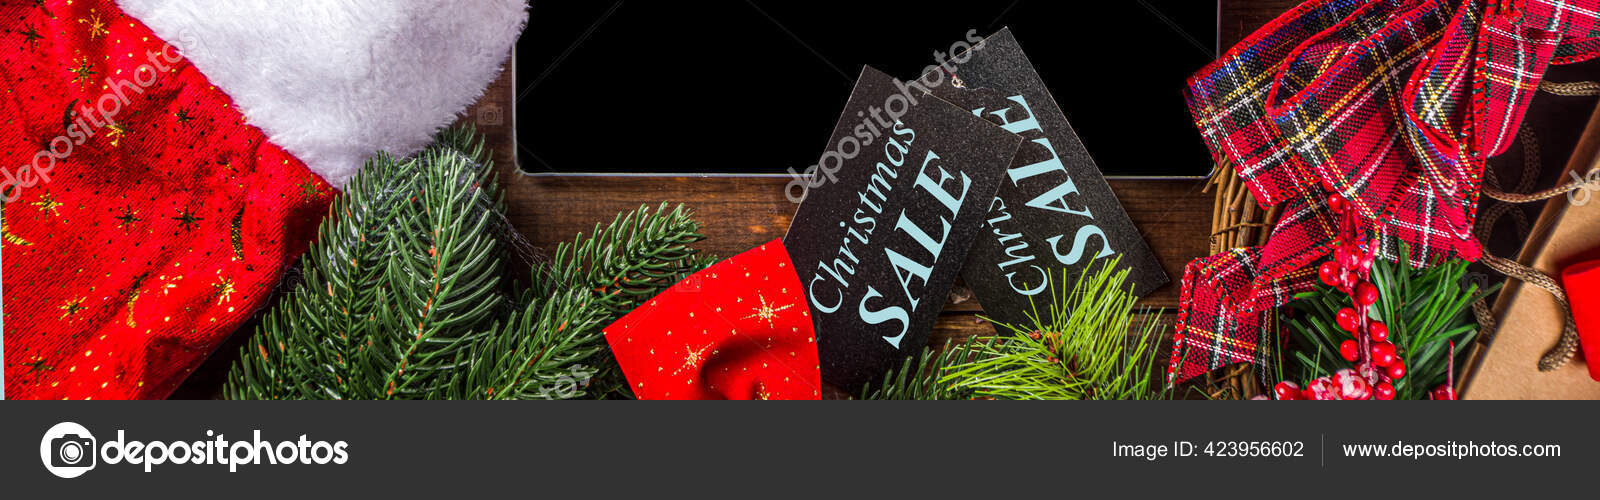 Christmas Sale Concept Black Friday Green Cyber Monday Background ...